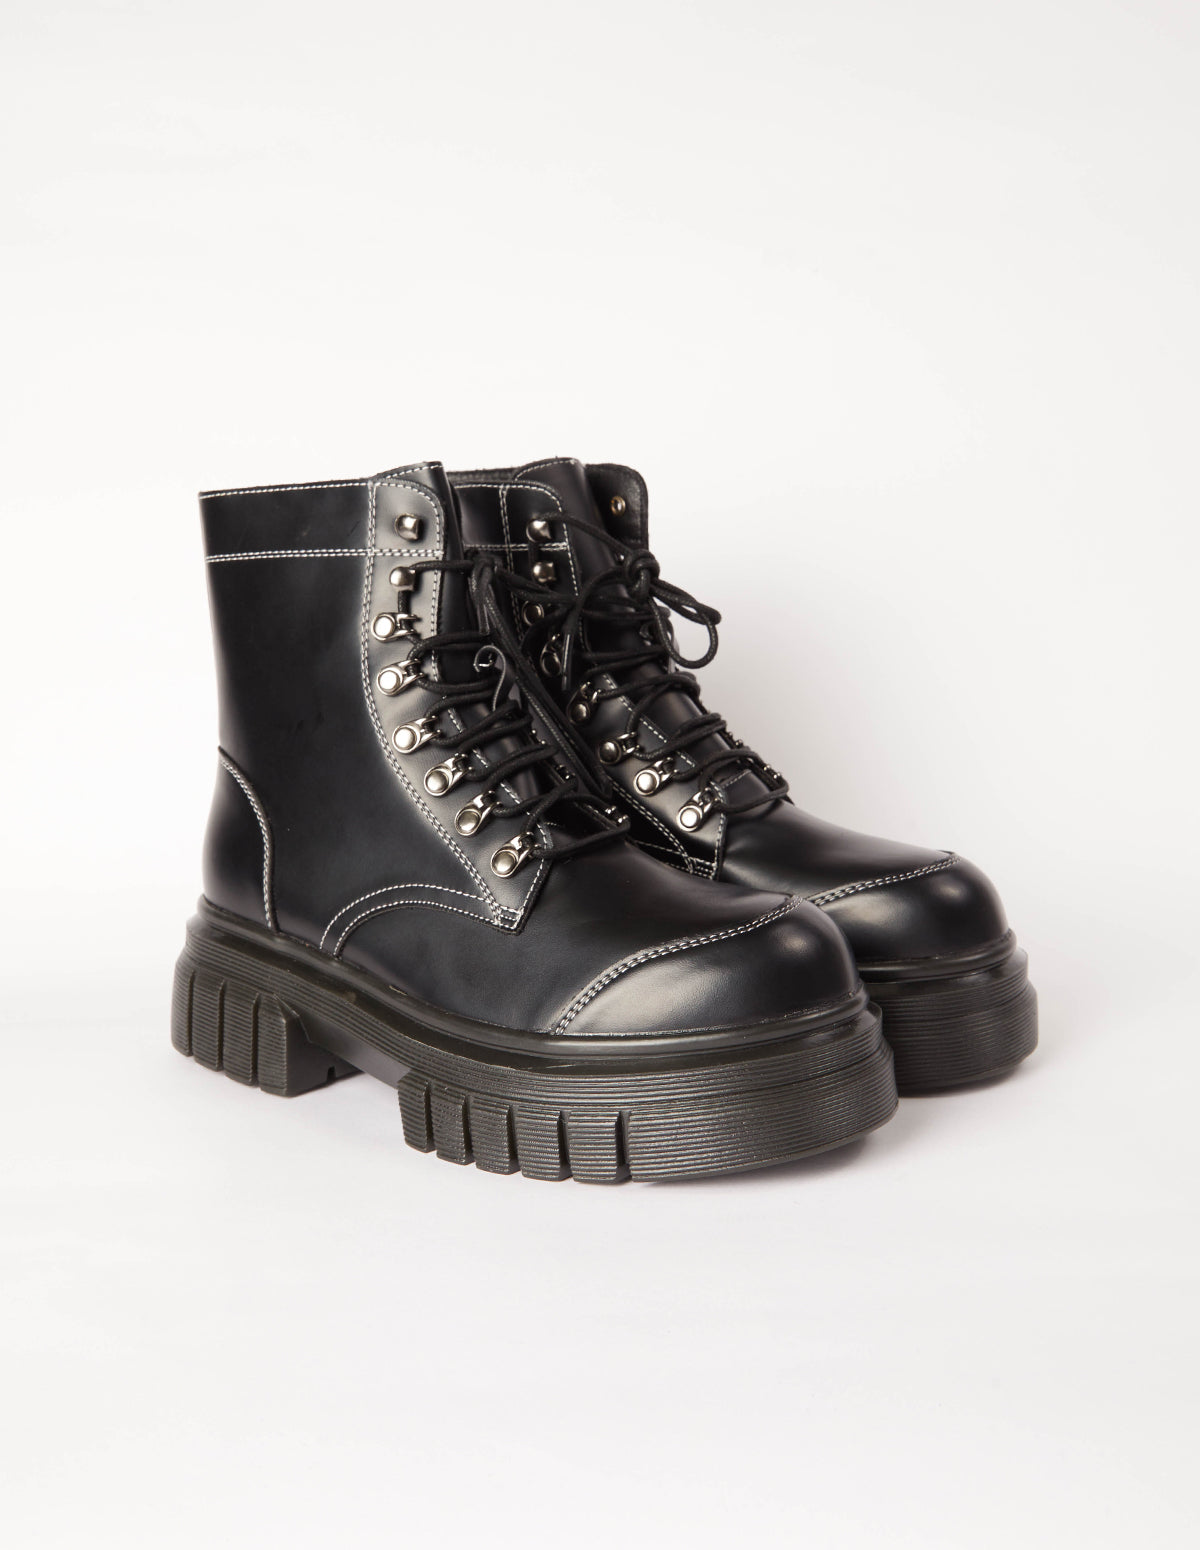 PU Lace Up Combat Style Boots - Apr